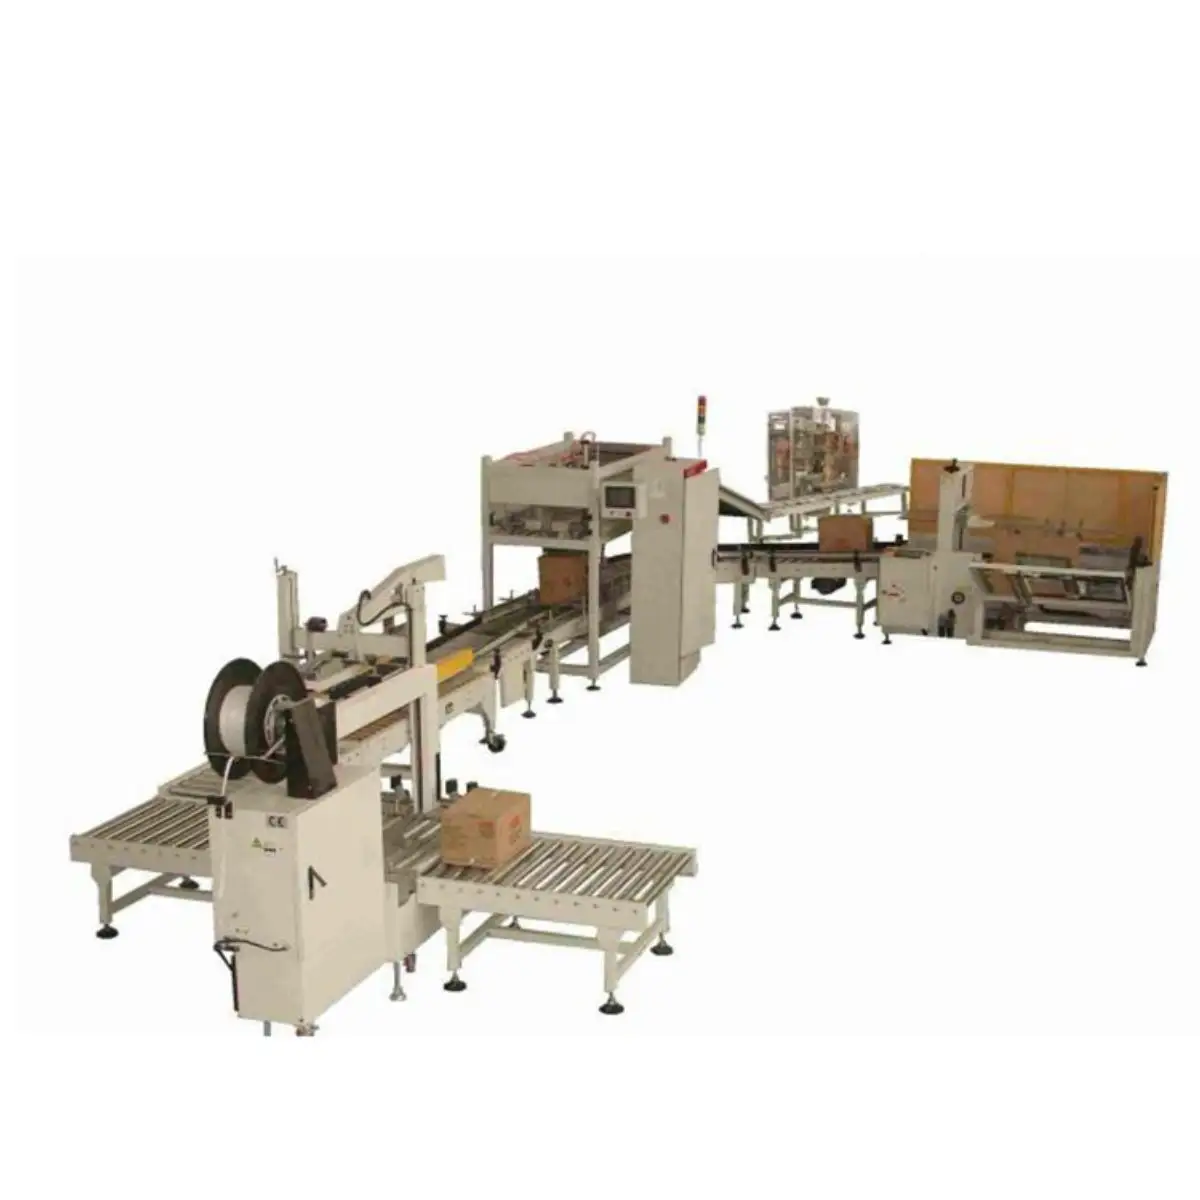 FILLING AUTO BRAND Packaging Machinery Corrugated Cardboard Box Packaging Machine In Production Line